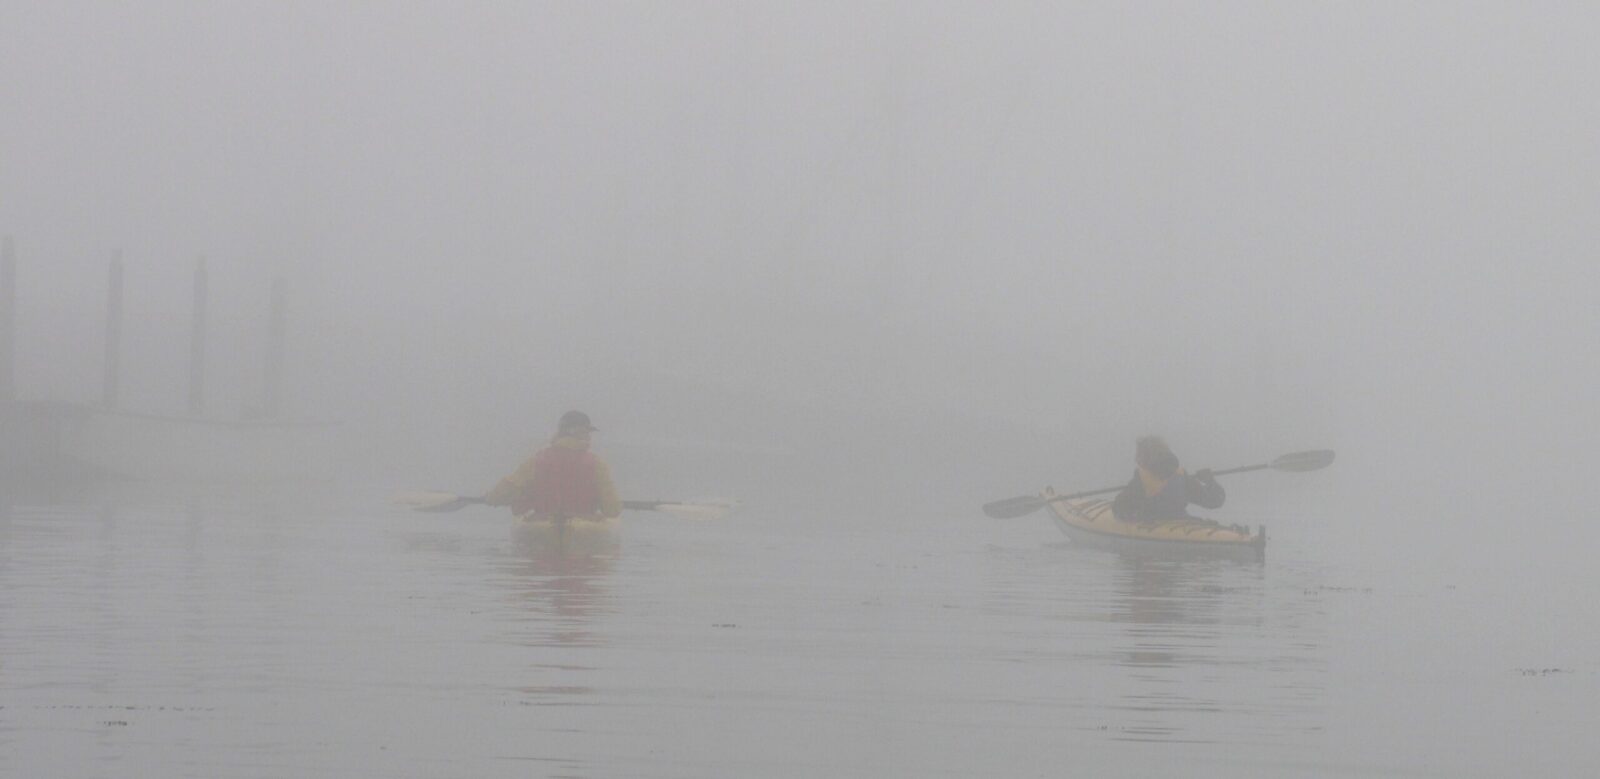 Two people in kayaks paddling in a foggy water.